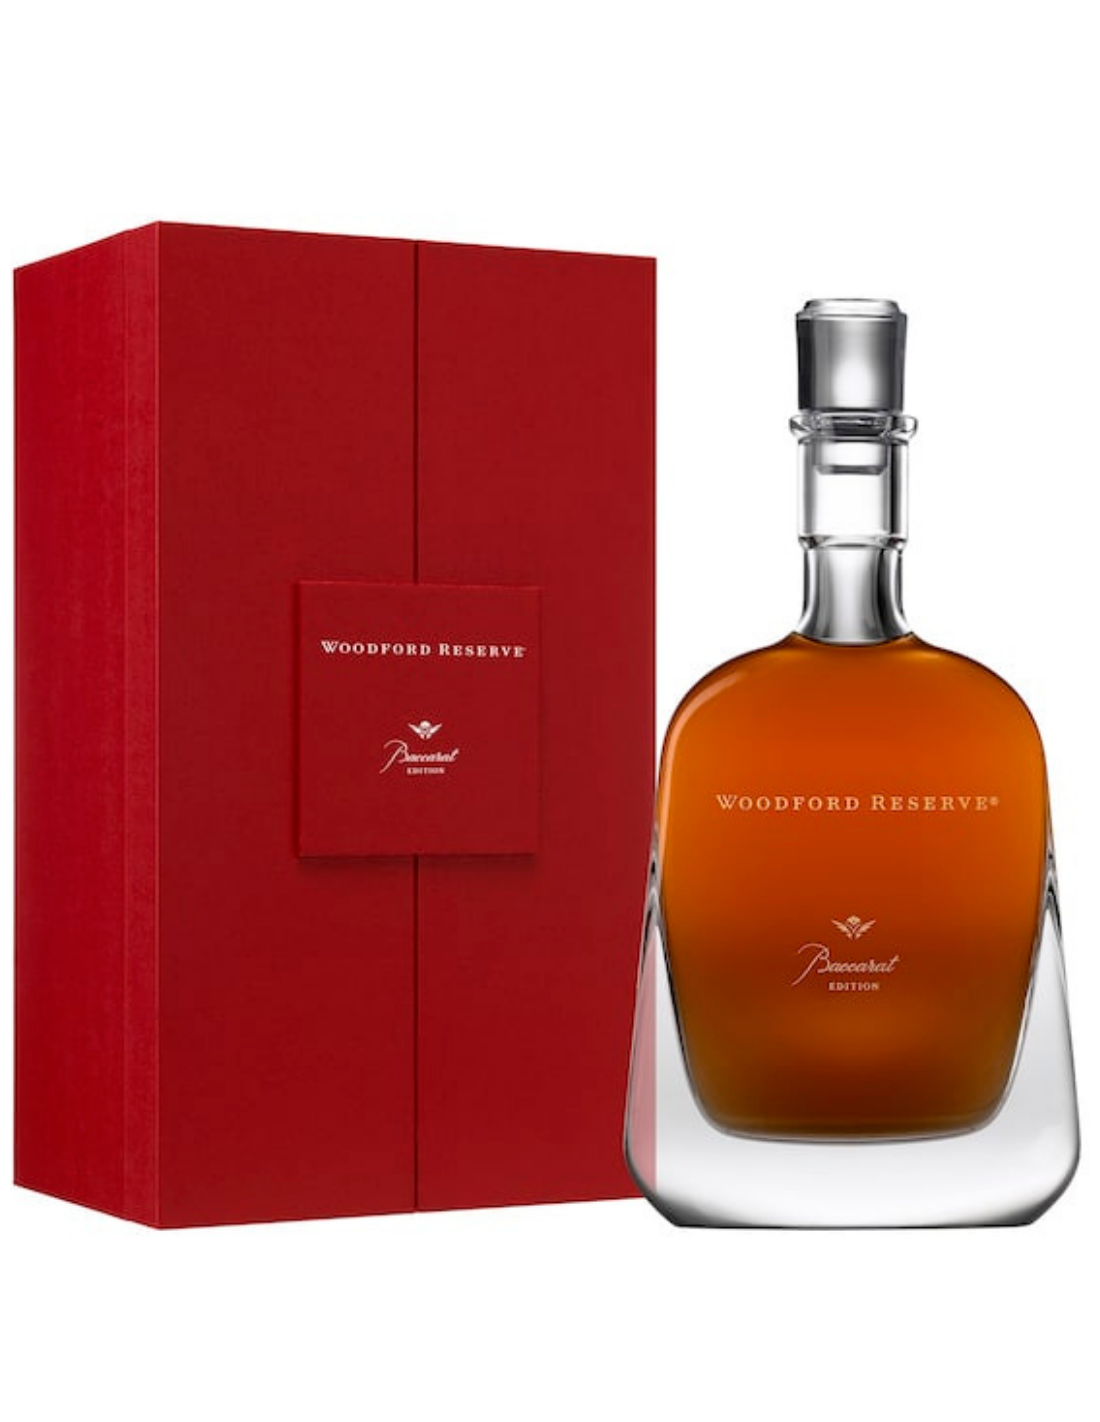 Whisky Woodford Reserve Baccarat Edition, 0.7L, 45.2% alc., SUA alcooldiscount.ro